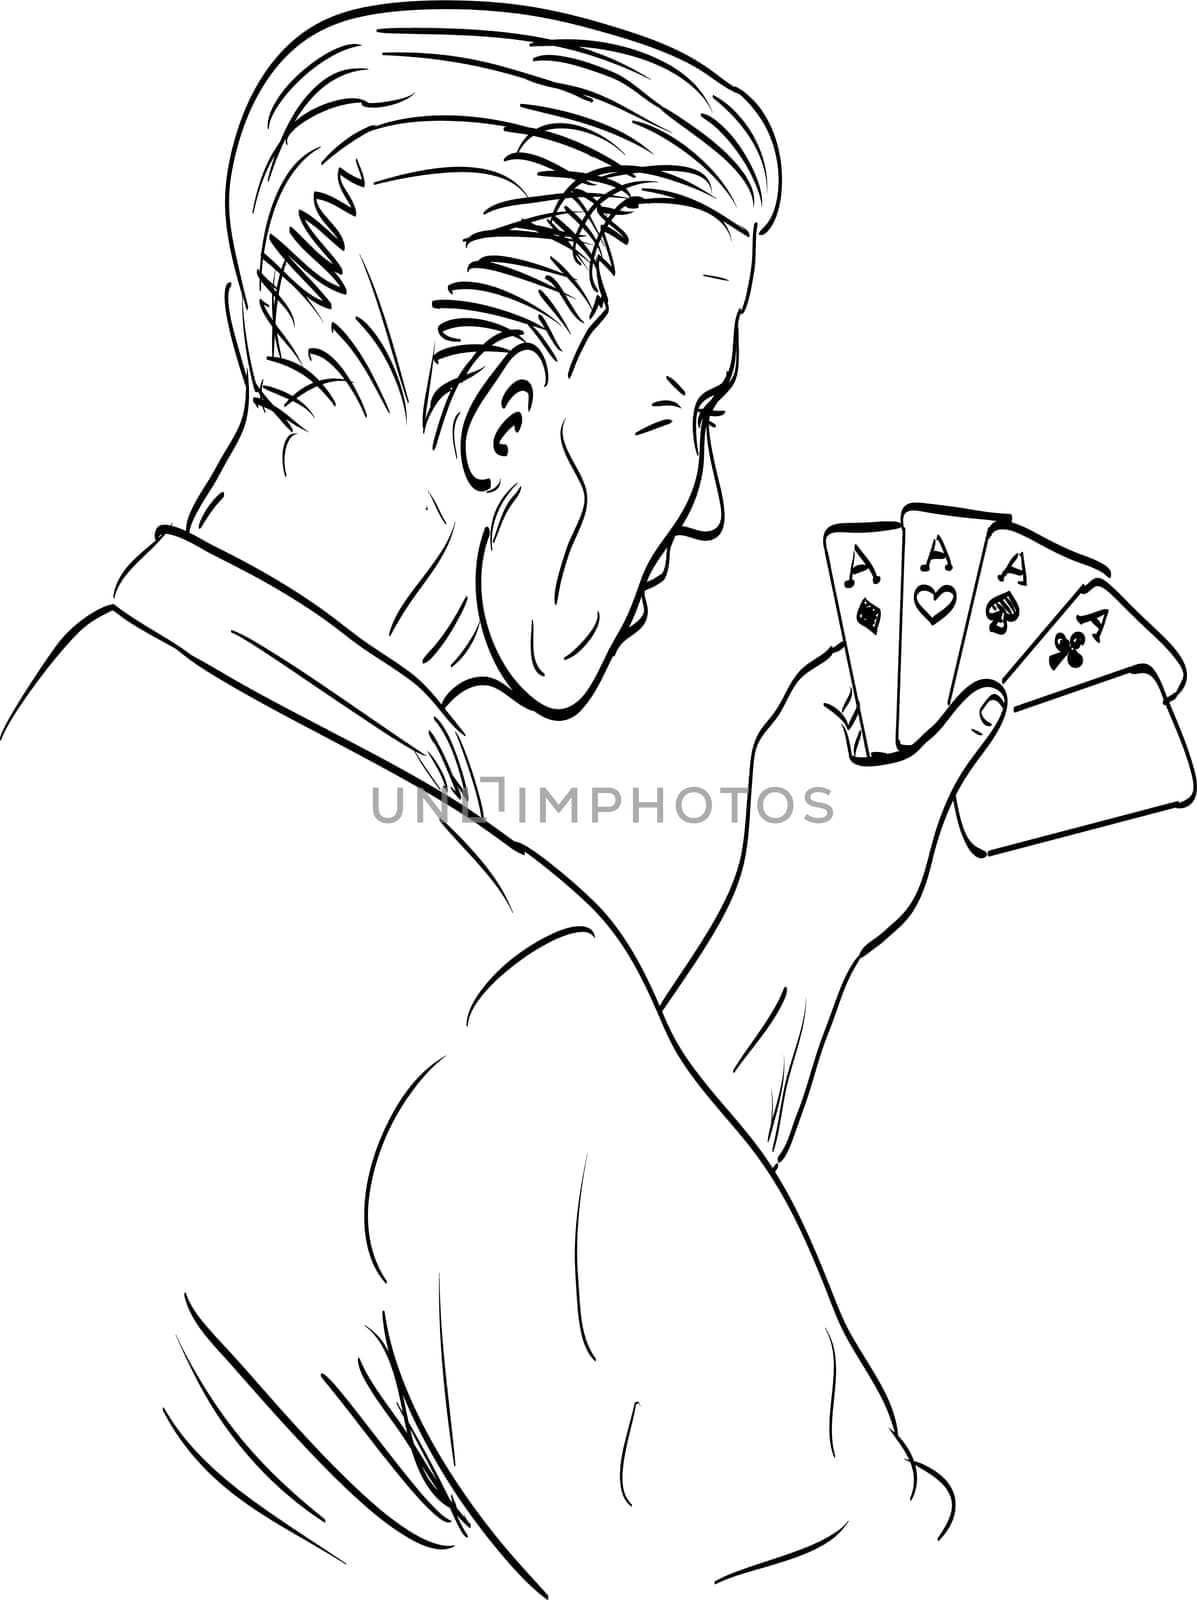 Gambler Holding Deck of Cards Rear View Drawing by patrimonio